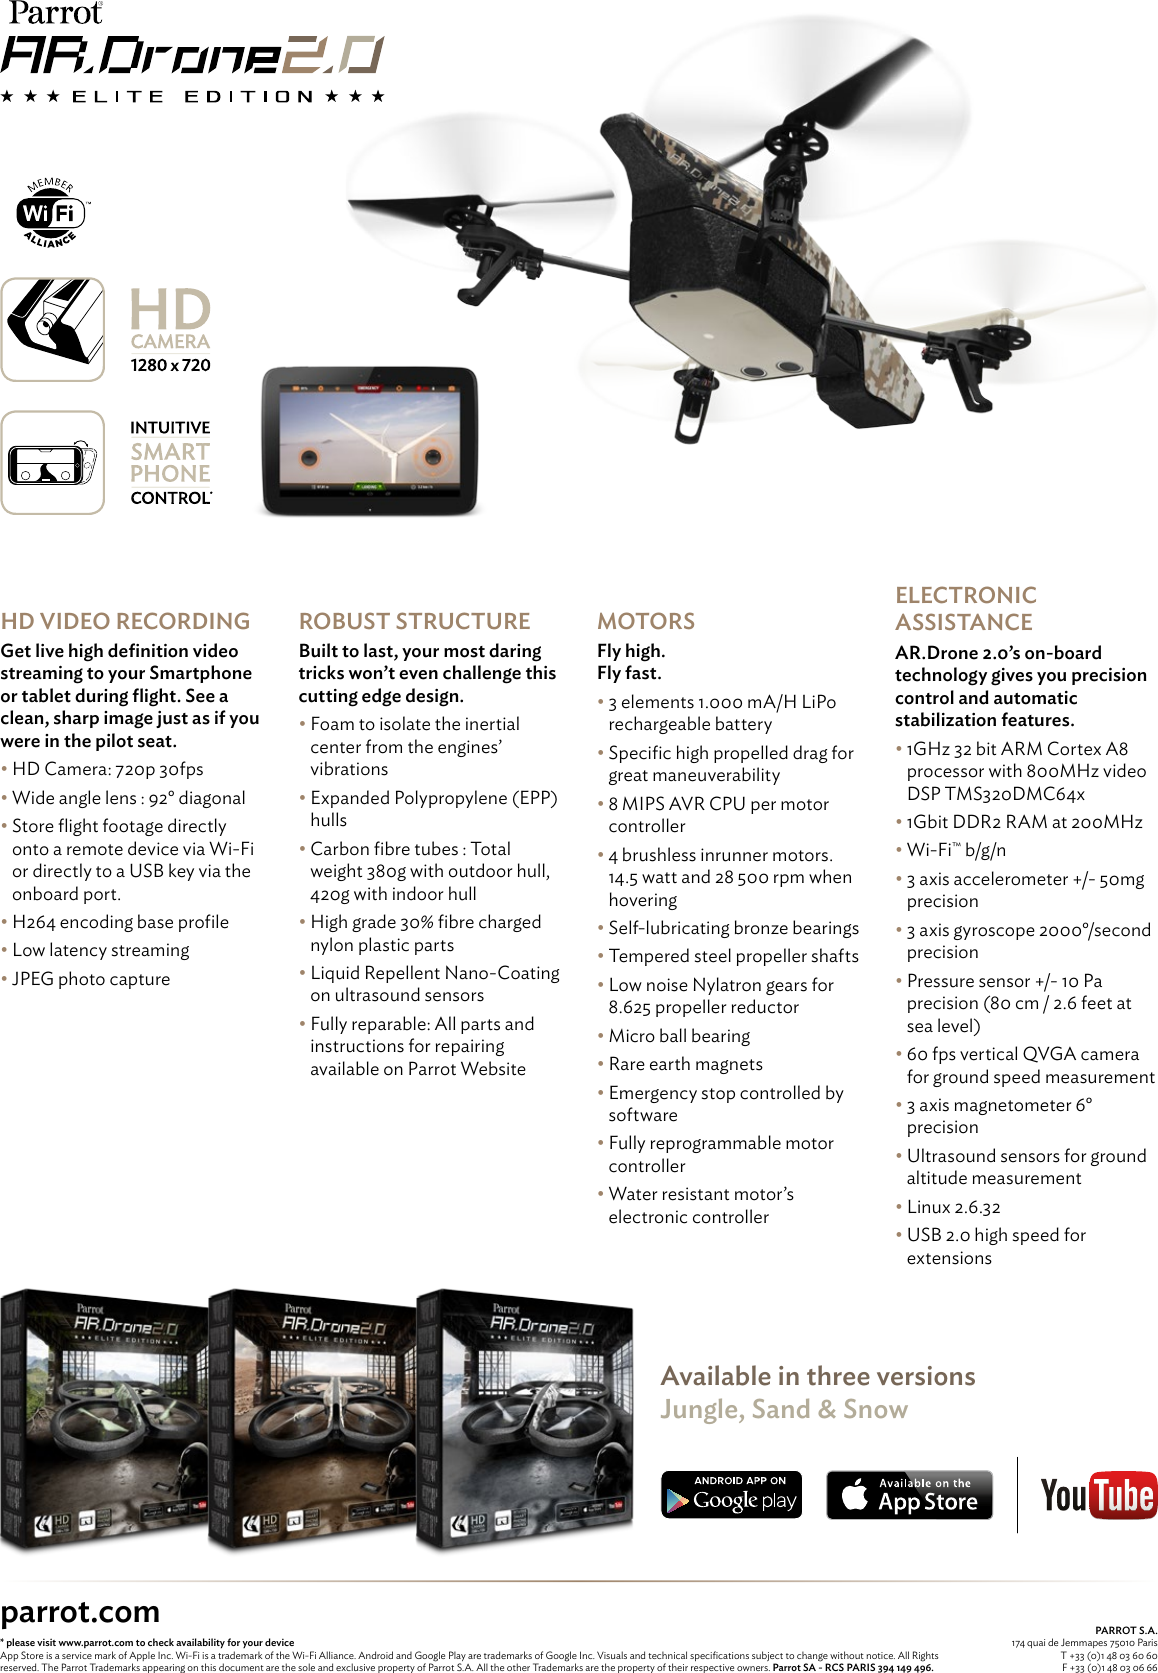 Page 2 of 2 - Parrot Parrot-Ar-Drone-2-0-Data-Sheet-  Parrot-ar-drone-2-0-data-sheet